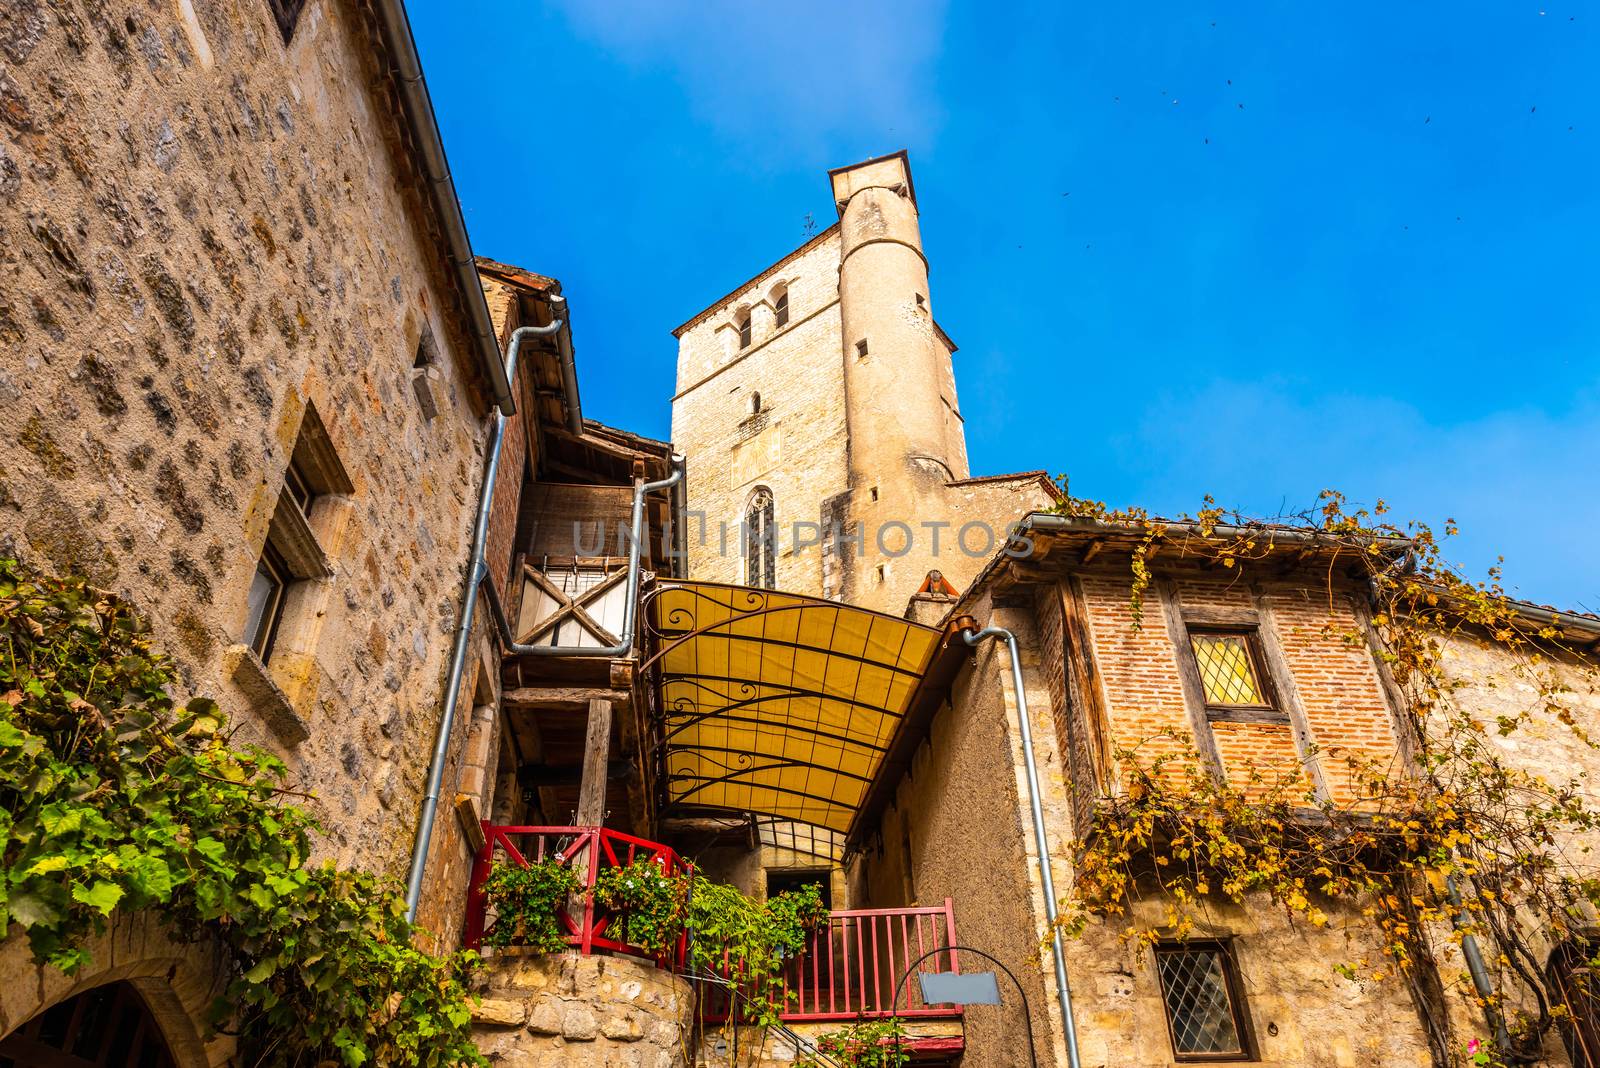 This magnificent medieval village located in the Lot department in the Occitanie region is part of the list of the most beautiful villages in France.